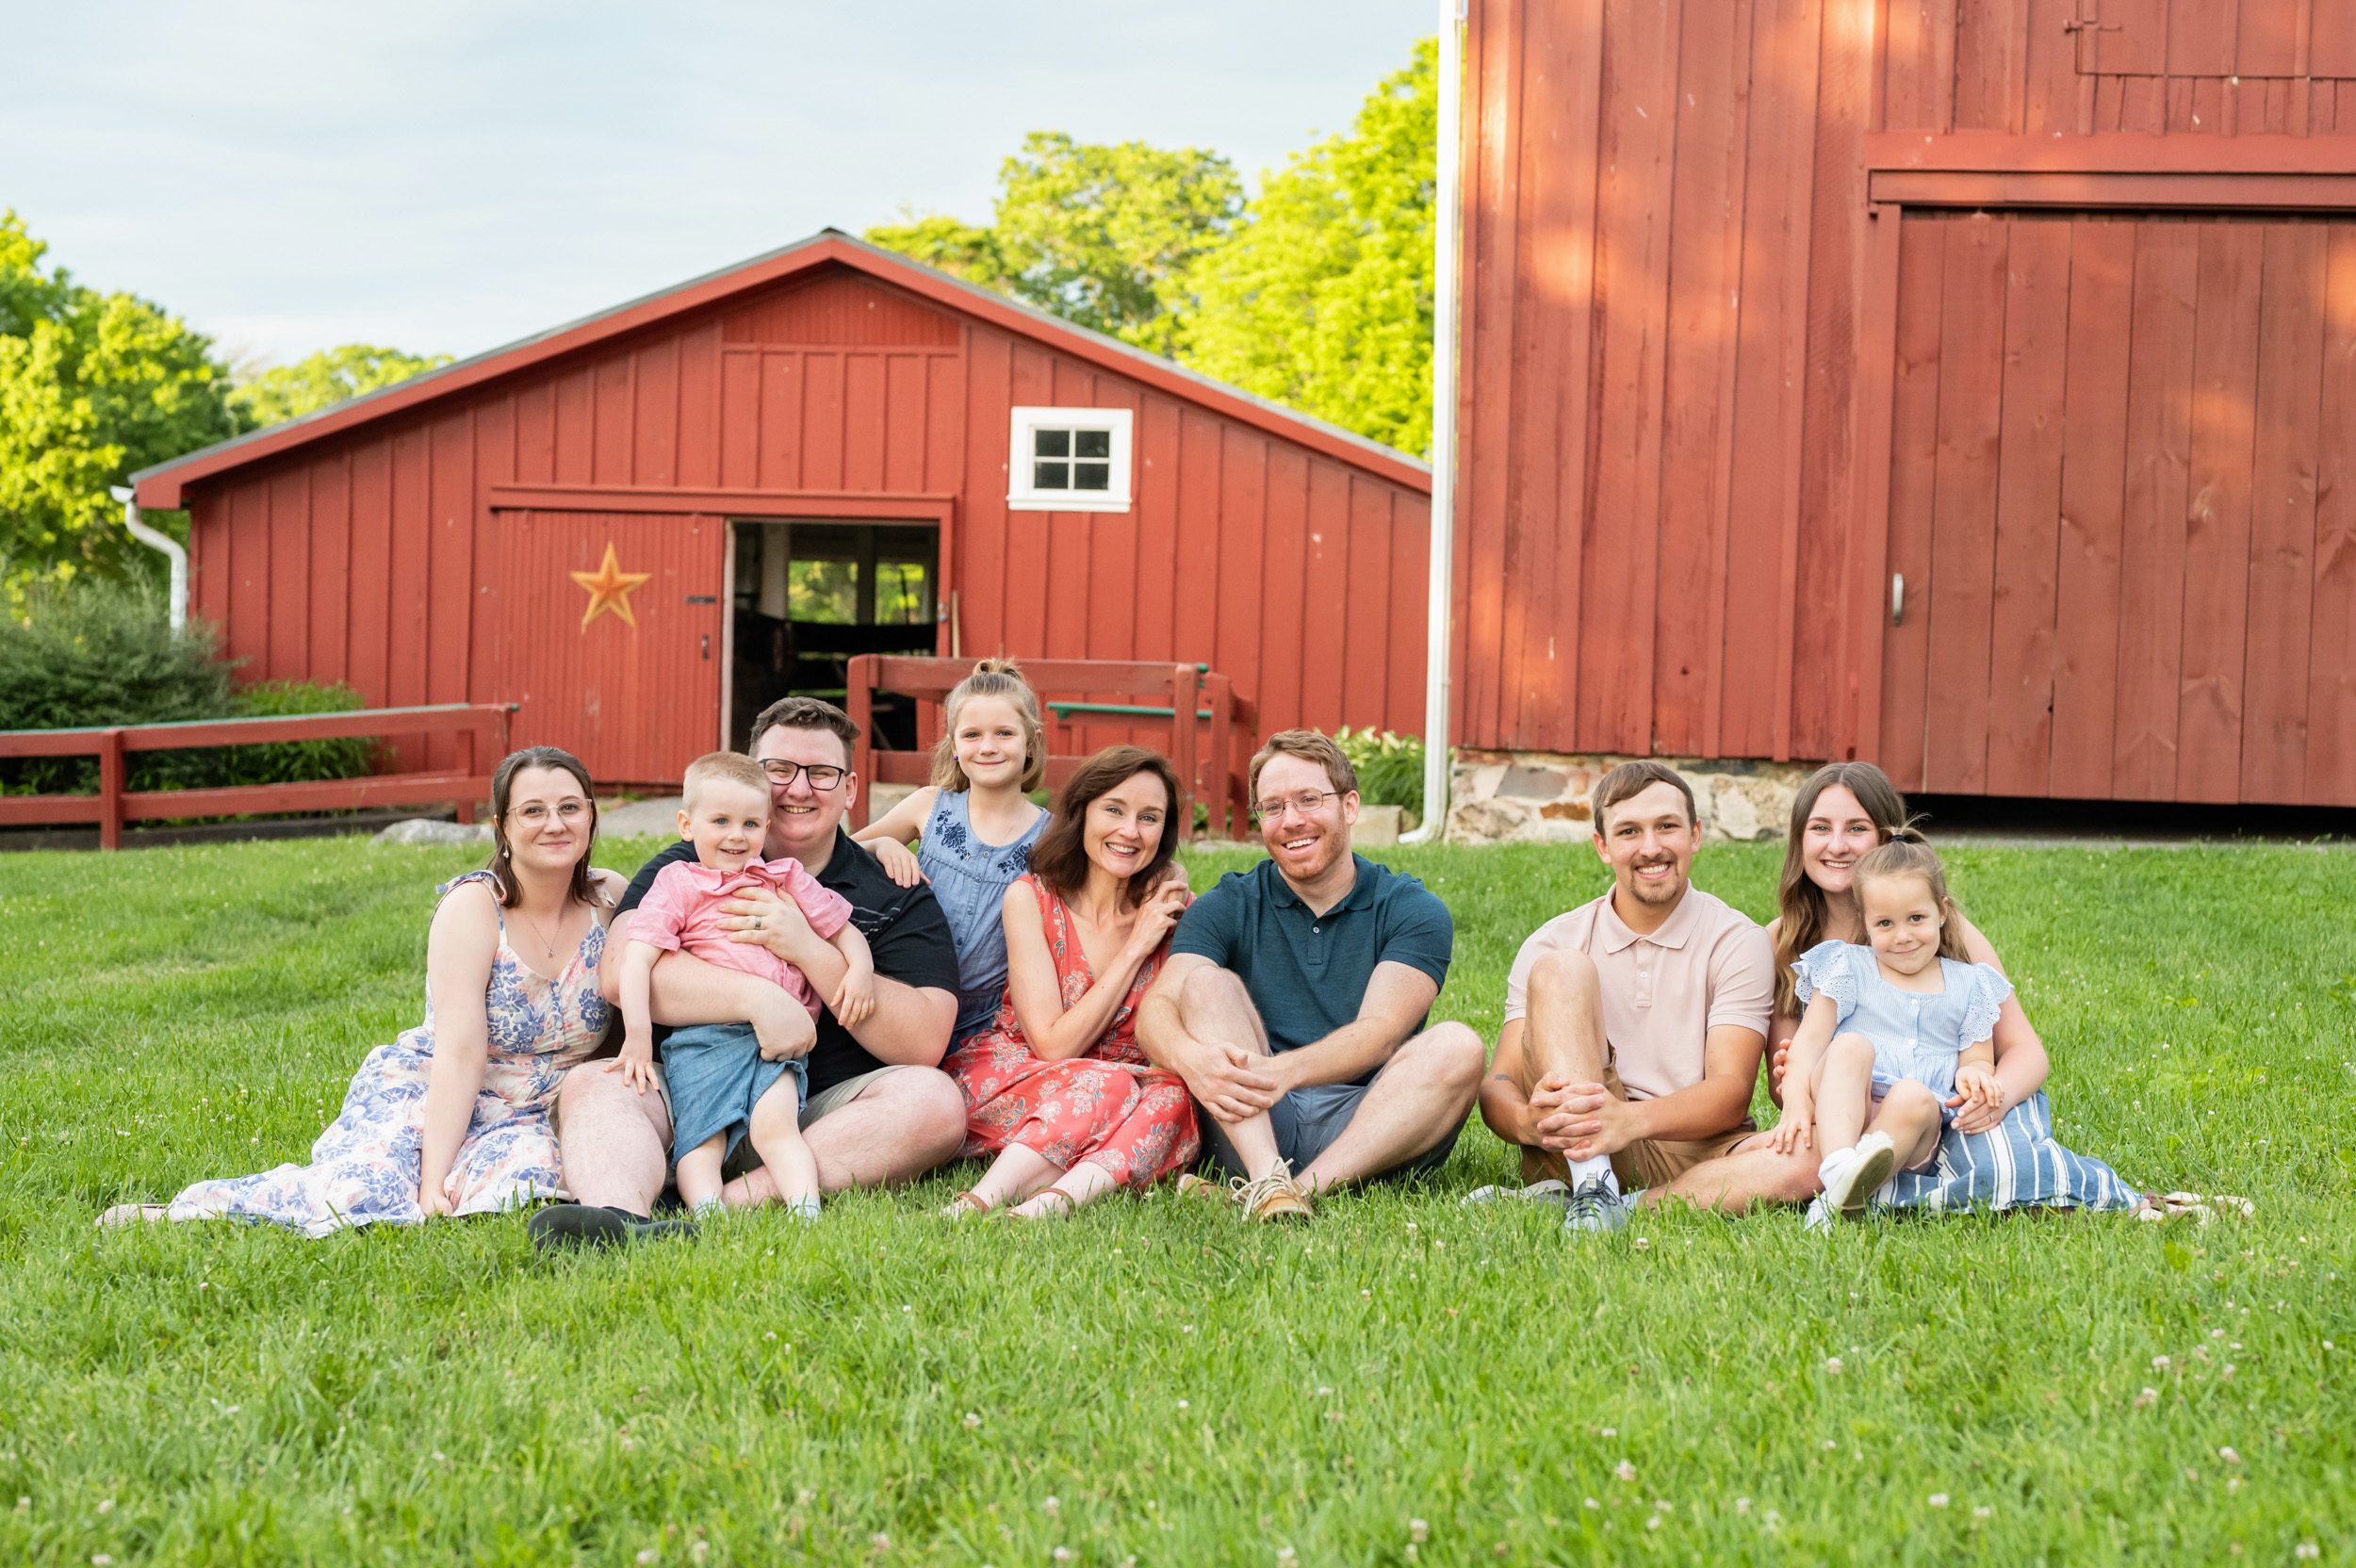 An extended family with grandparents, their kids and spouses, and their grandkids sitting in the grass in front of a red barn during an extended family photoshoot